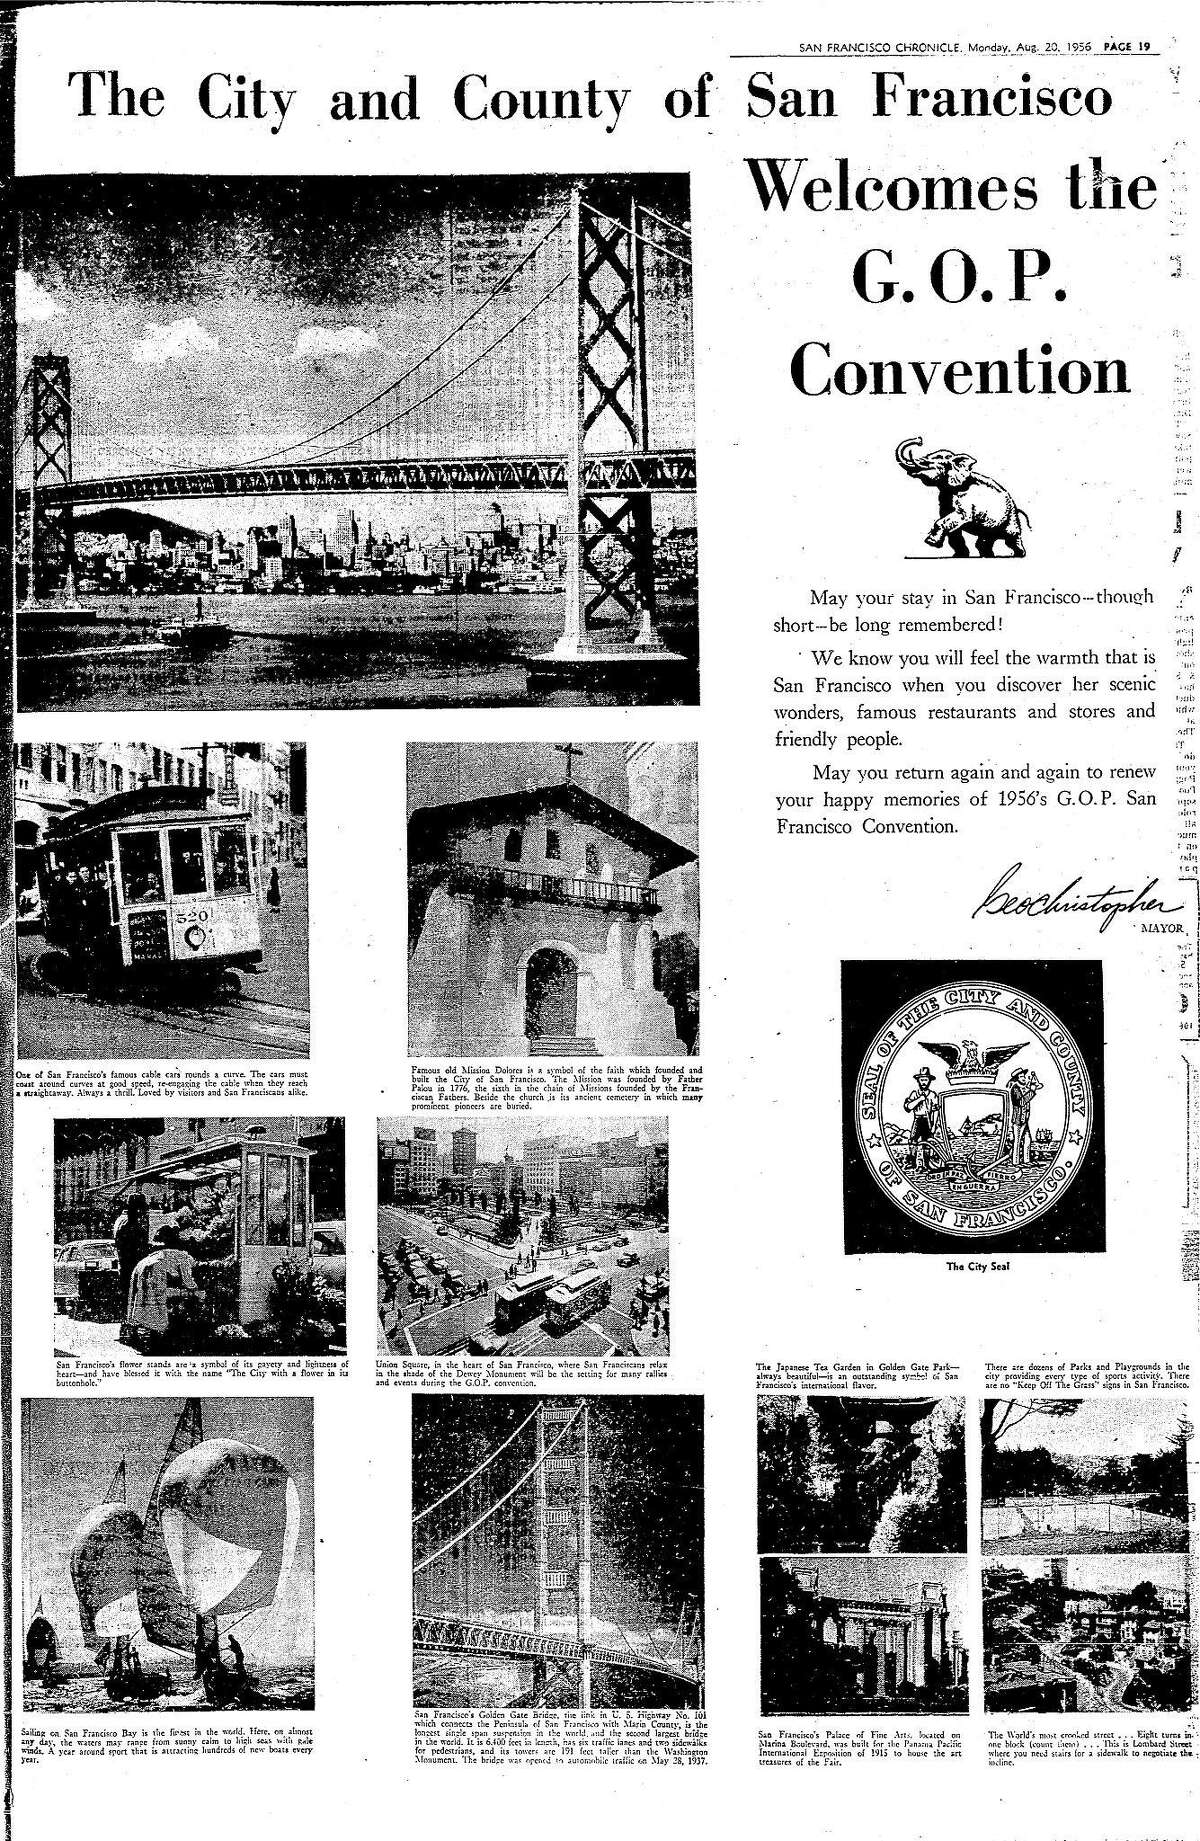 An August 20, 1956 full page ad Welcoming the Republican National Convention list a number of popular tourist sites, including the crooked portion of Lombard Street